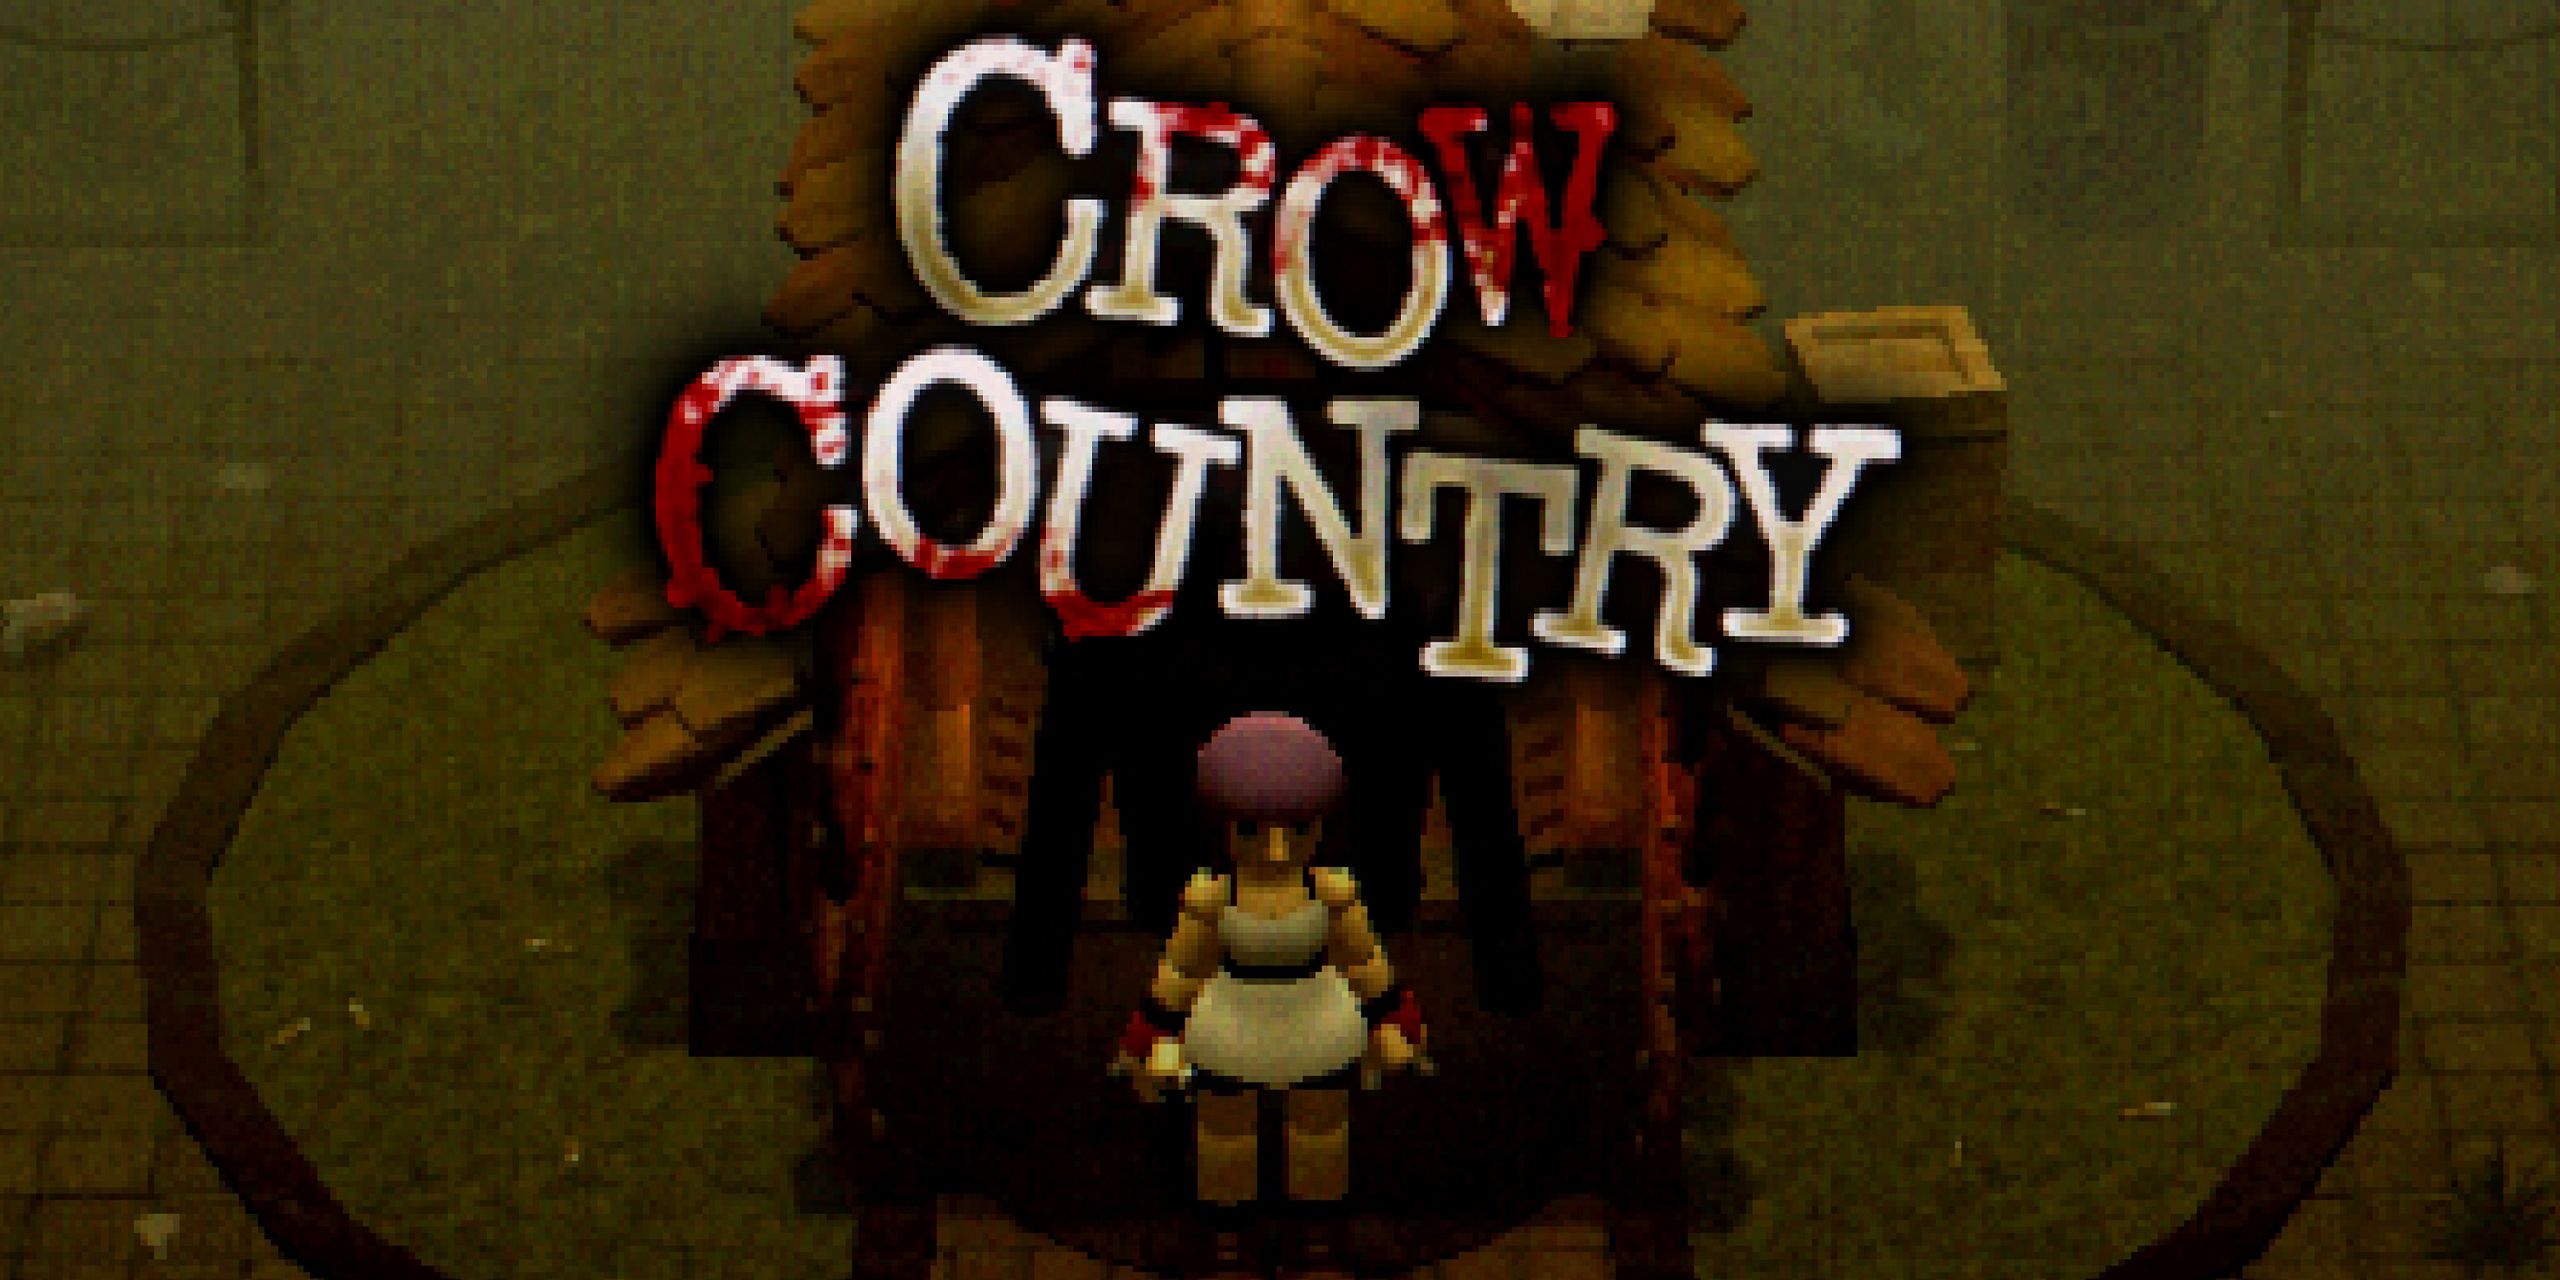 Crow Country logo superimposed over an image of game protagonist Mara in front of a shack.